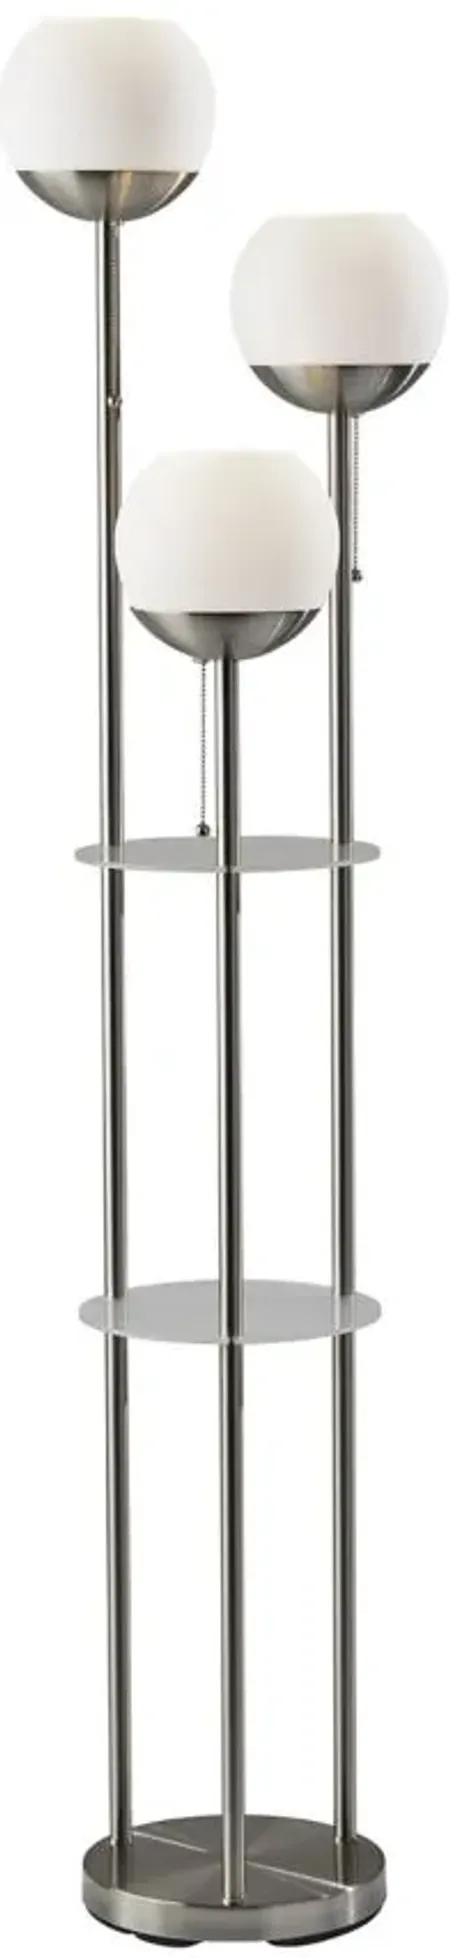 Bianca Floor Lamp w/ Shelves in Brushed Steel by Adesso Inc